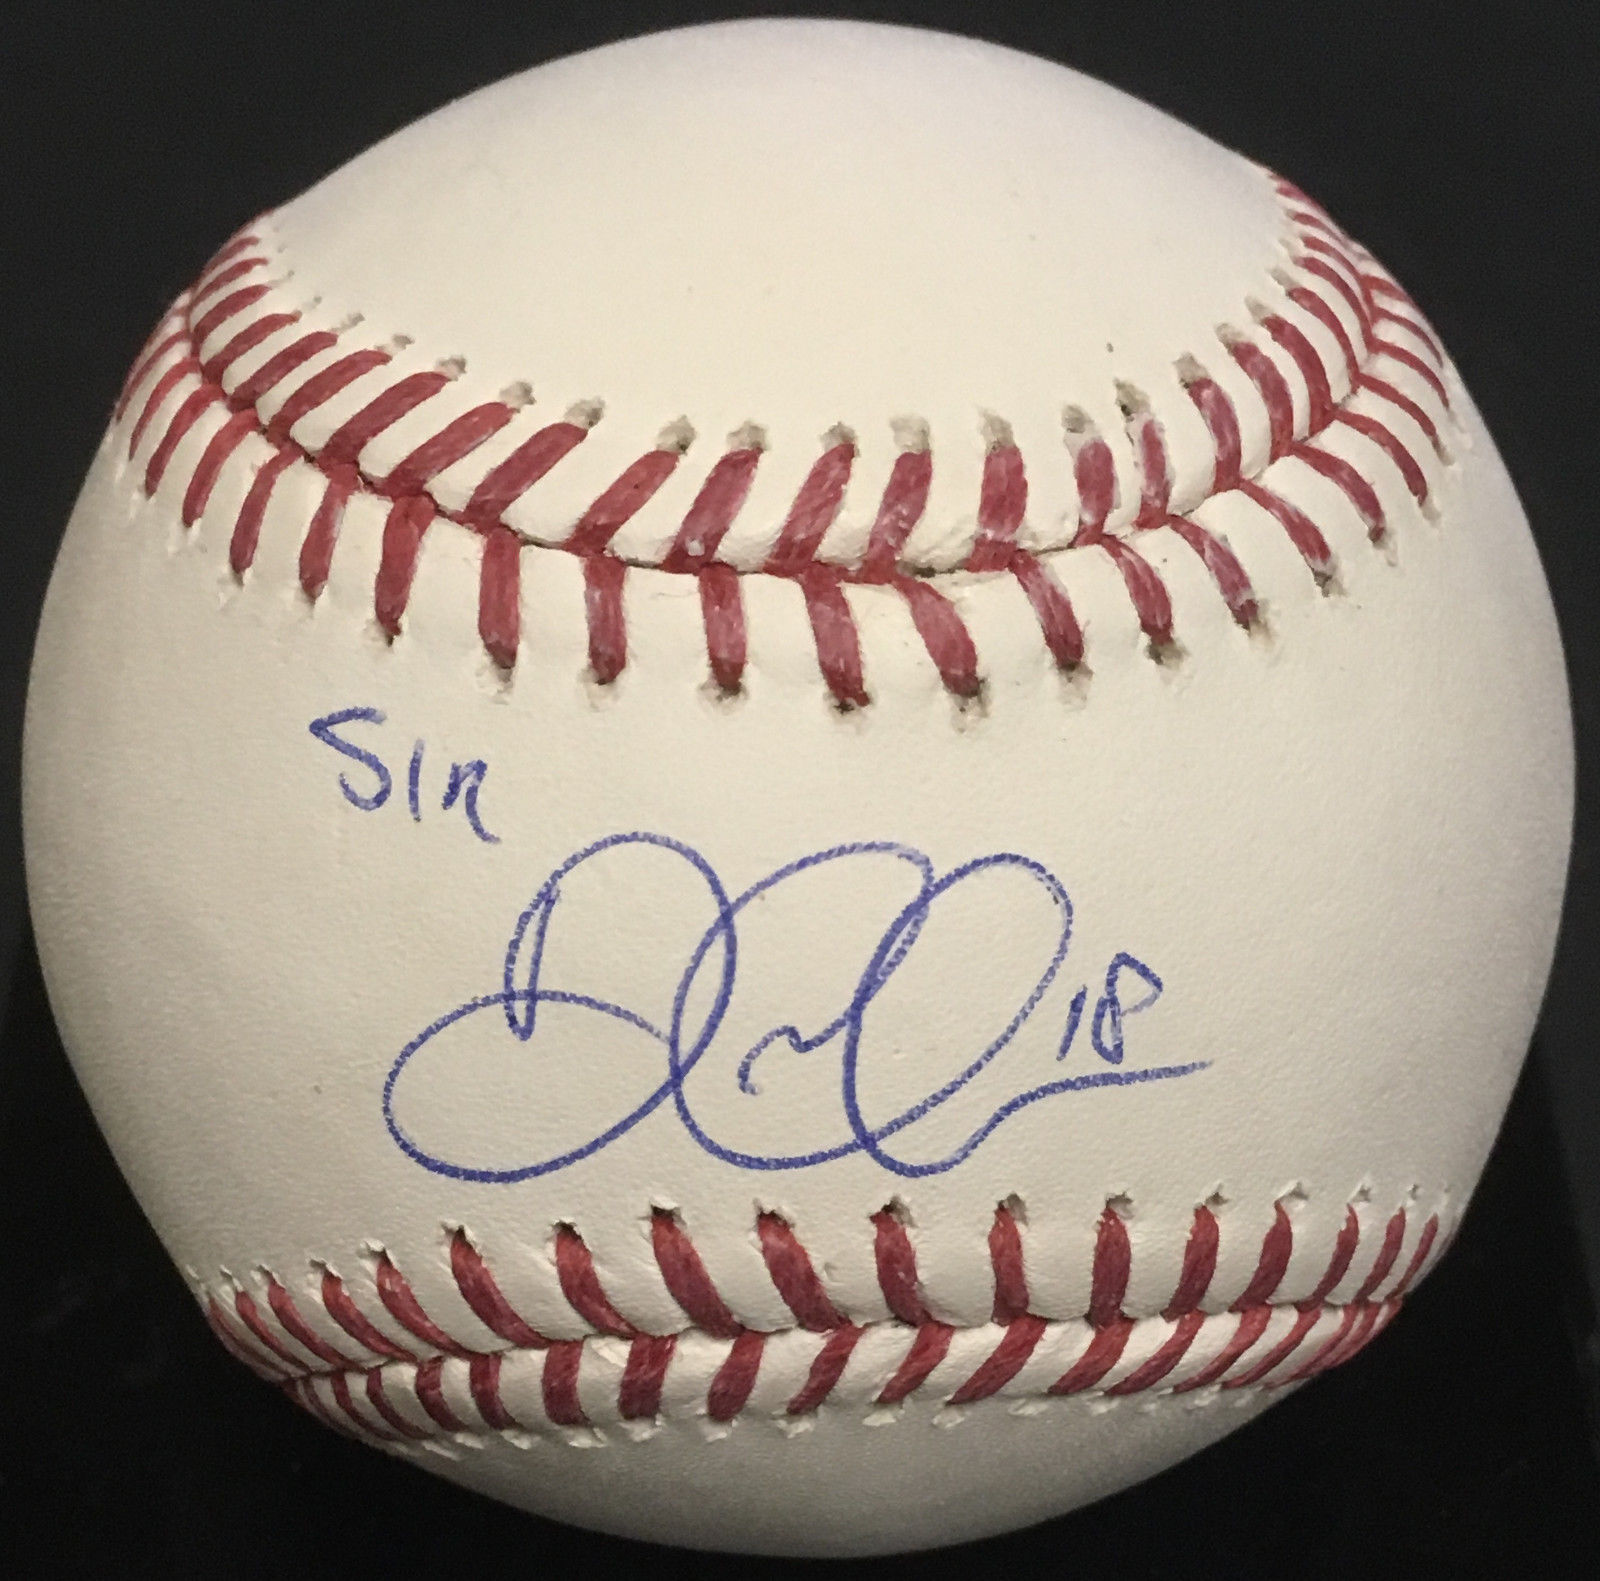 Didi Gregorius Yankees signed SIR official MLB baseball auto ins 18 Steiner COA